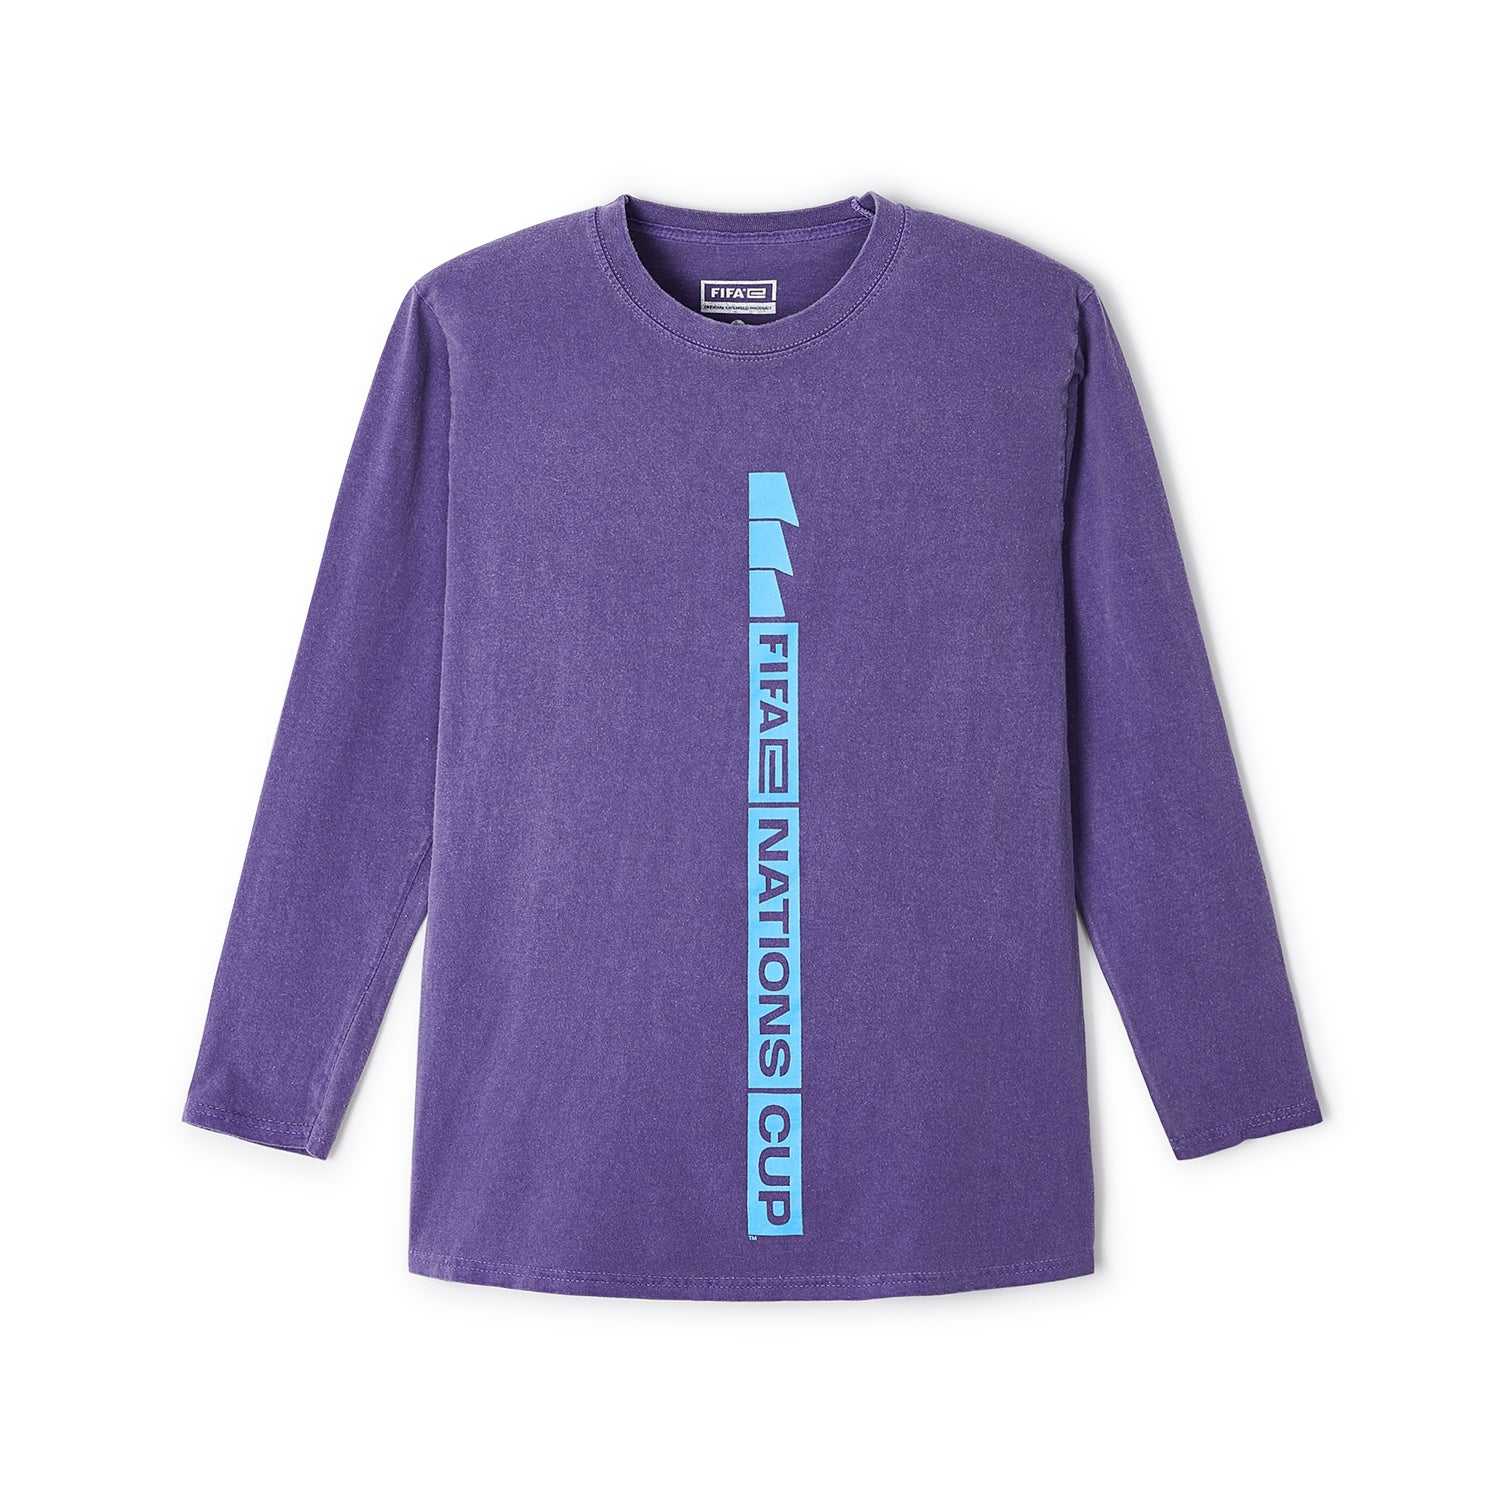 FIFAe Nations Cup 2022 Long Sleeve T-Shirt Purple - Mens